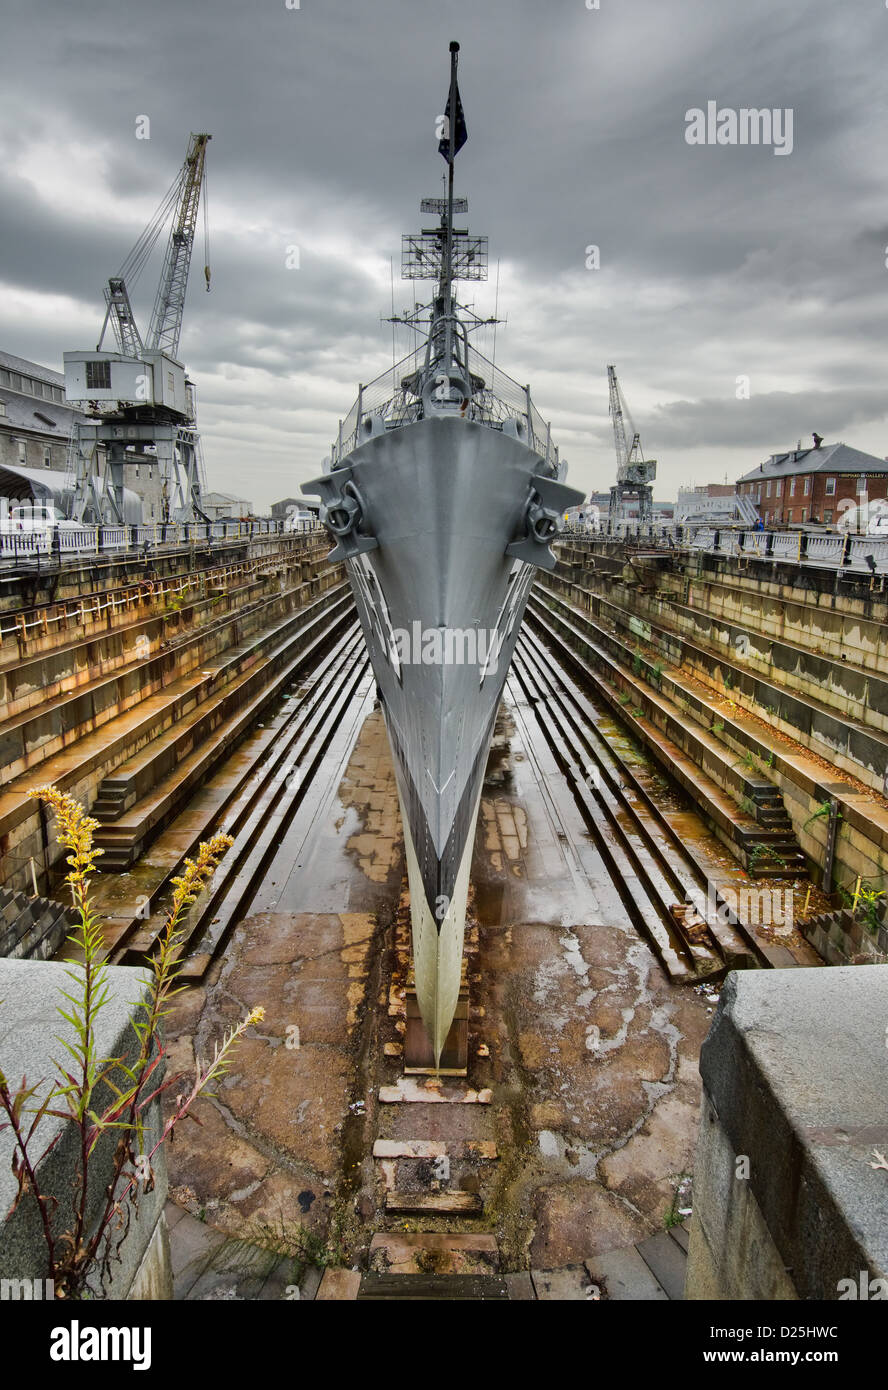 USS Cassin Young, Charlestown Navy Yard, Boston, Massachusetts, United States Banque D'Images